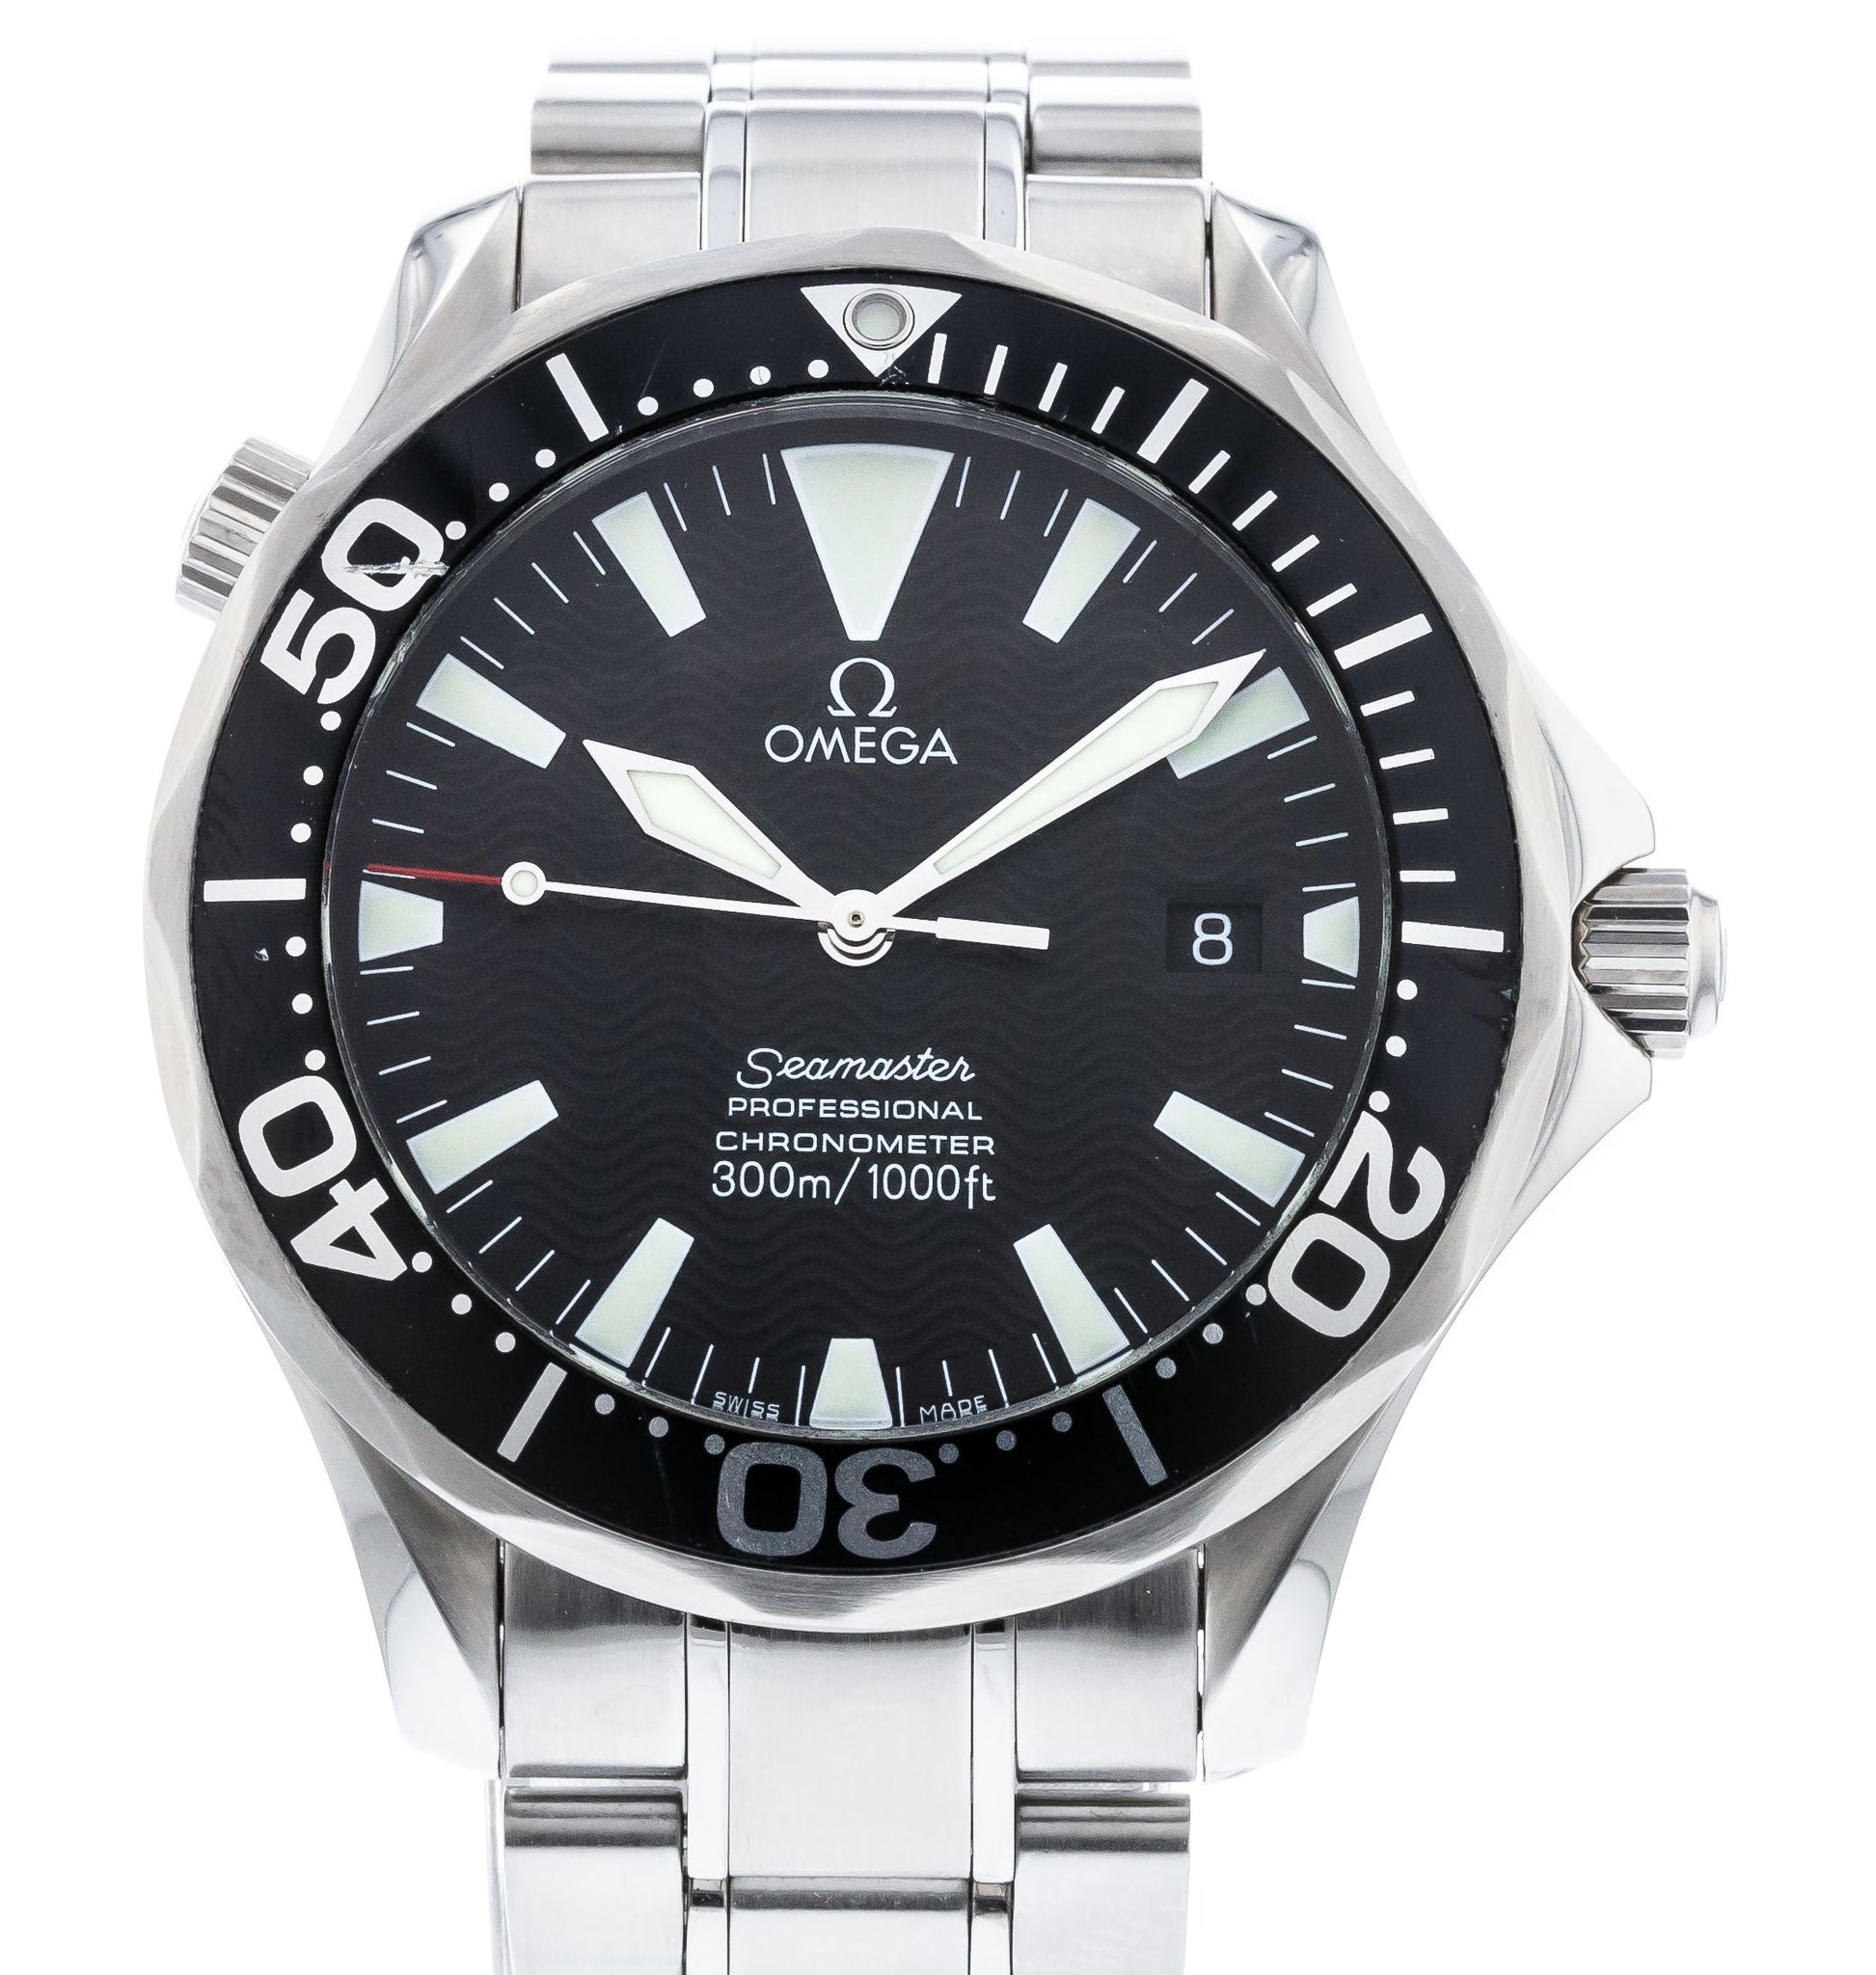 Authentic Used OMEGA Seamaster 300M 2254.50.00 Watch (10-10-OME-E9SBK7)